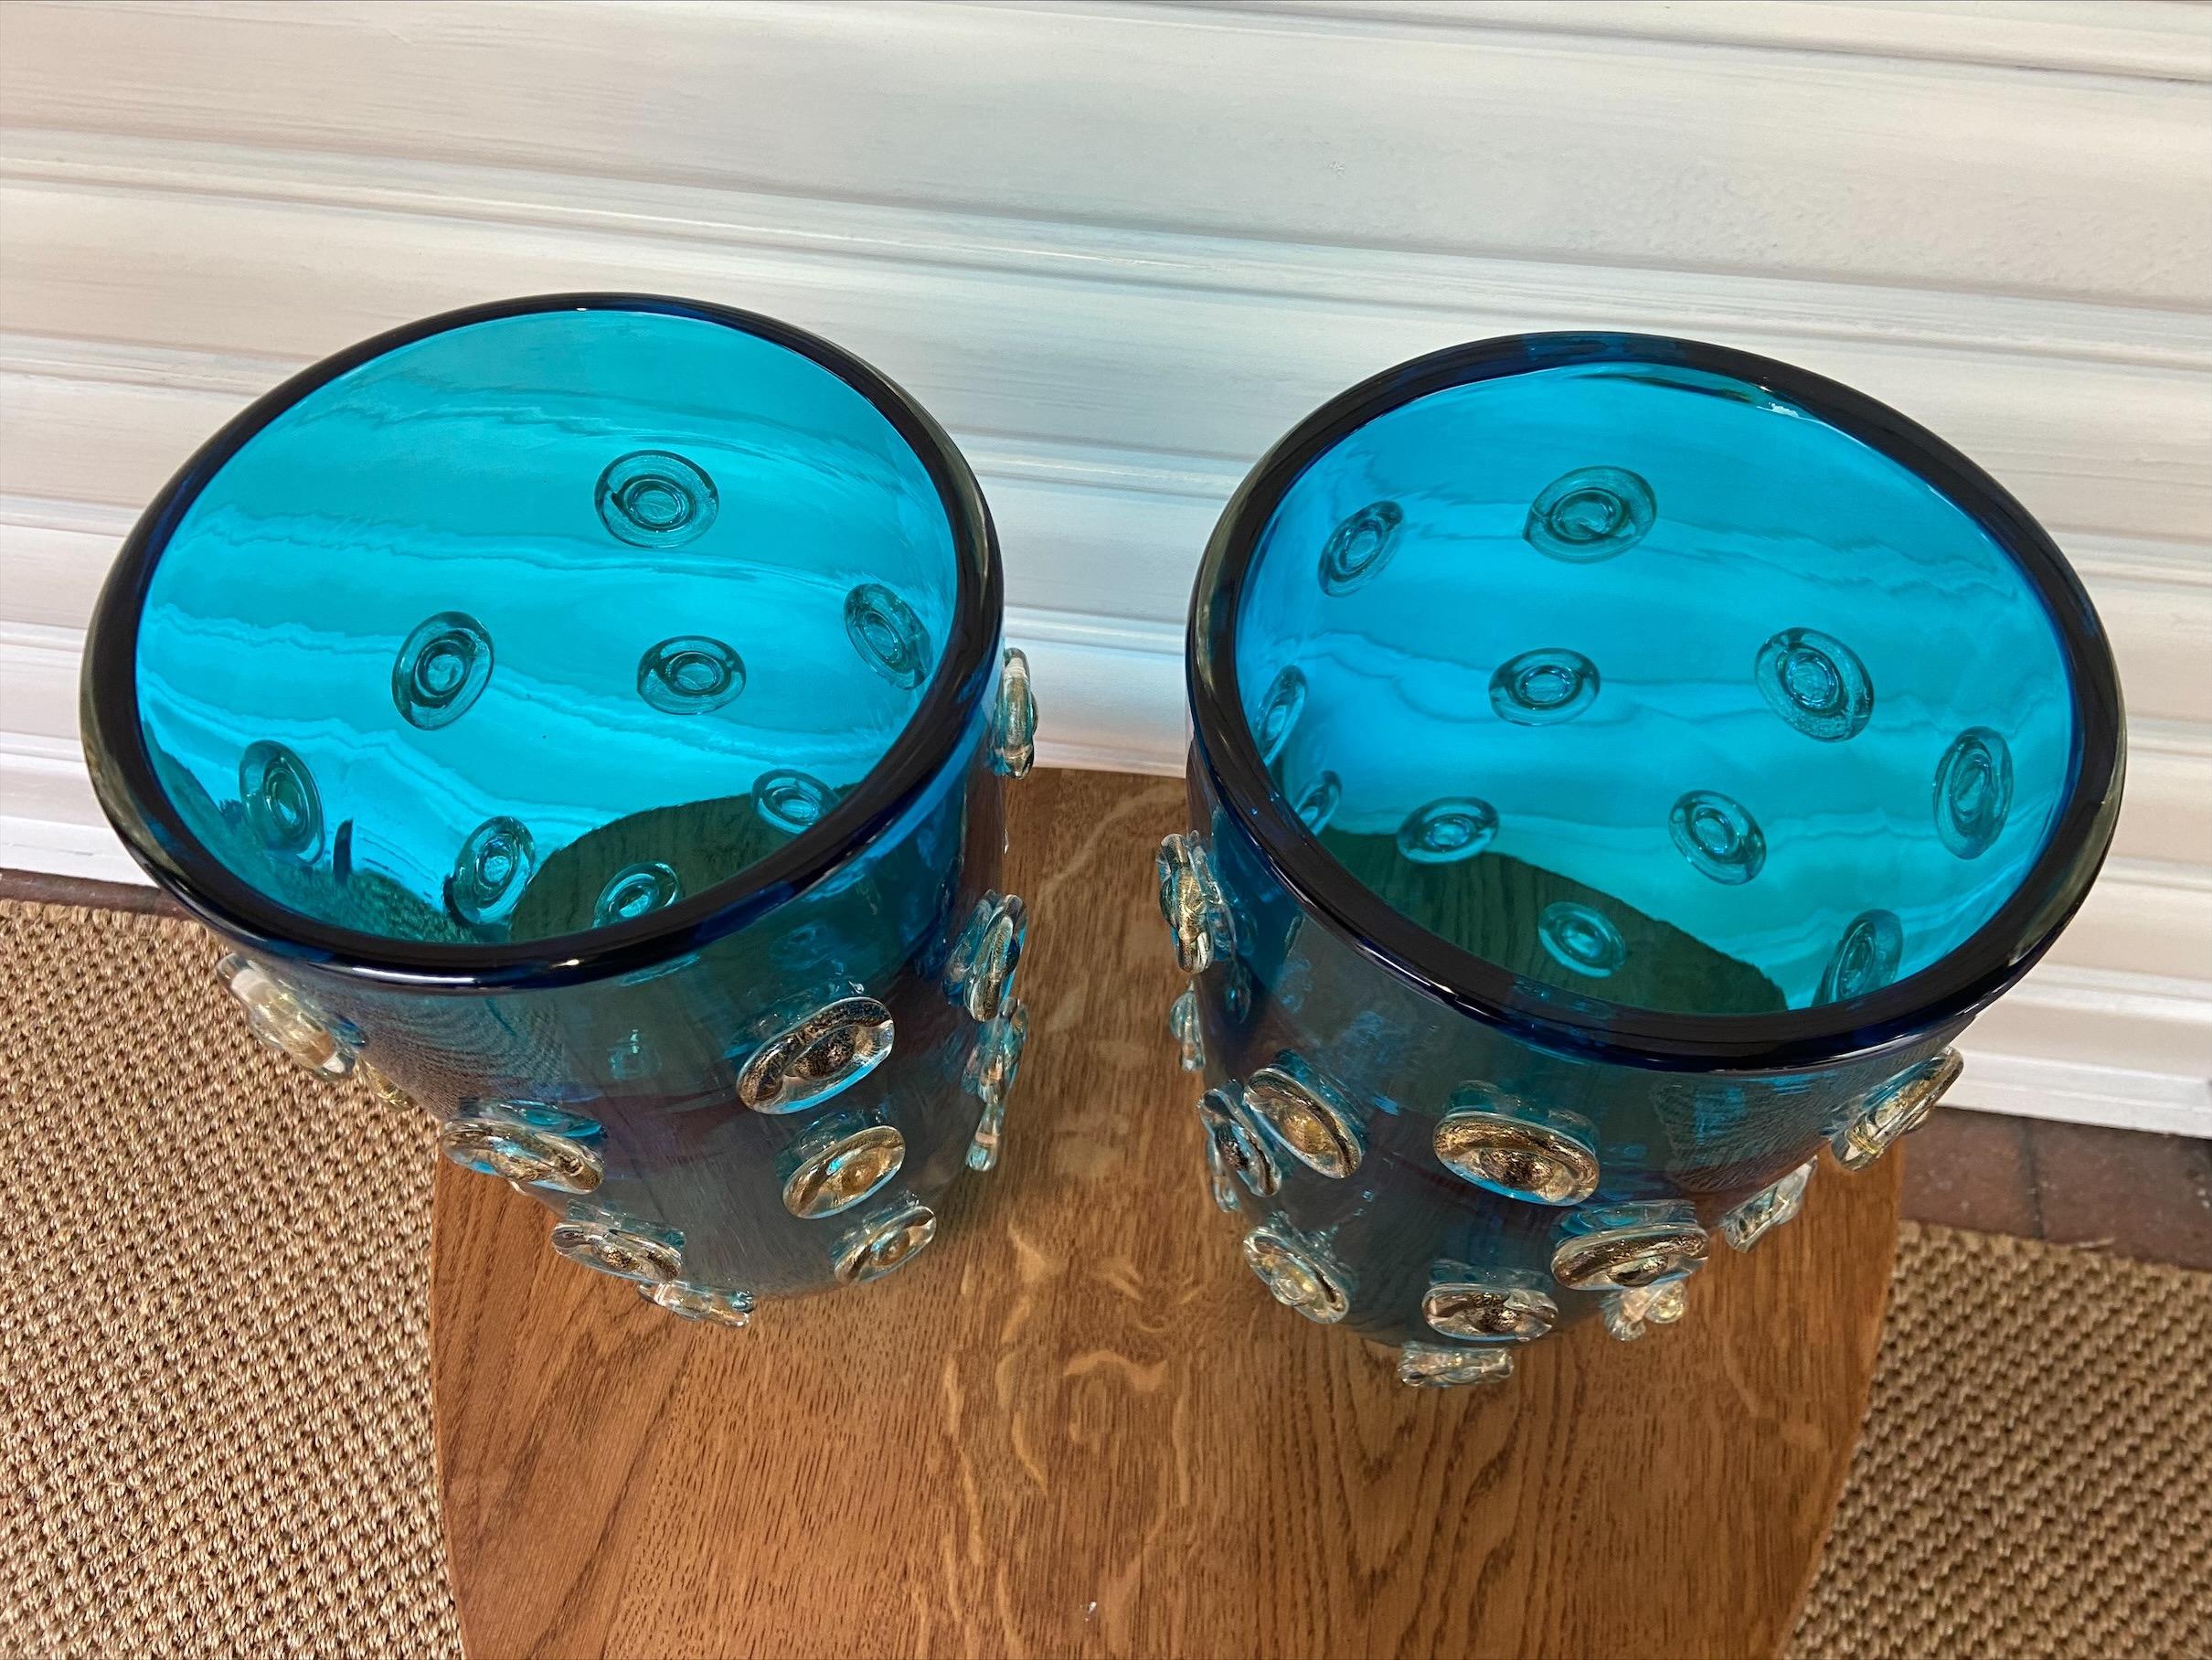 Pair of blue vases - Alberto Donà - 1980
Murano glass
Signed
Measures: H 37 x D 20 cm.